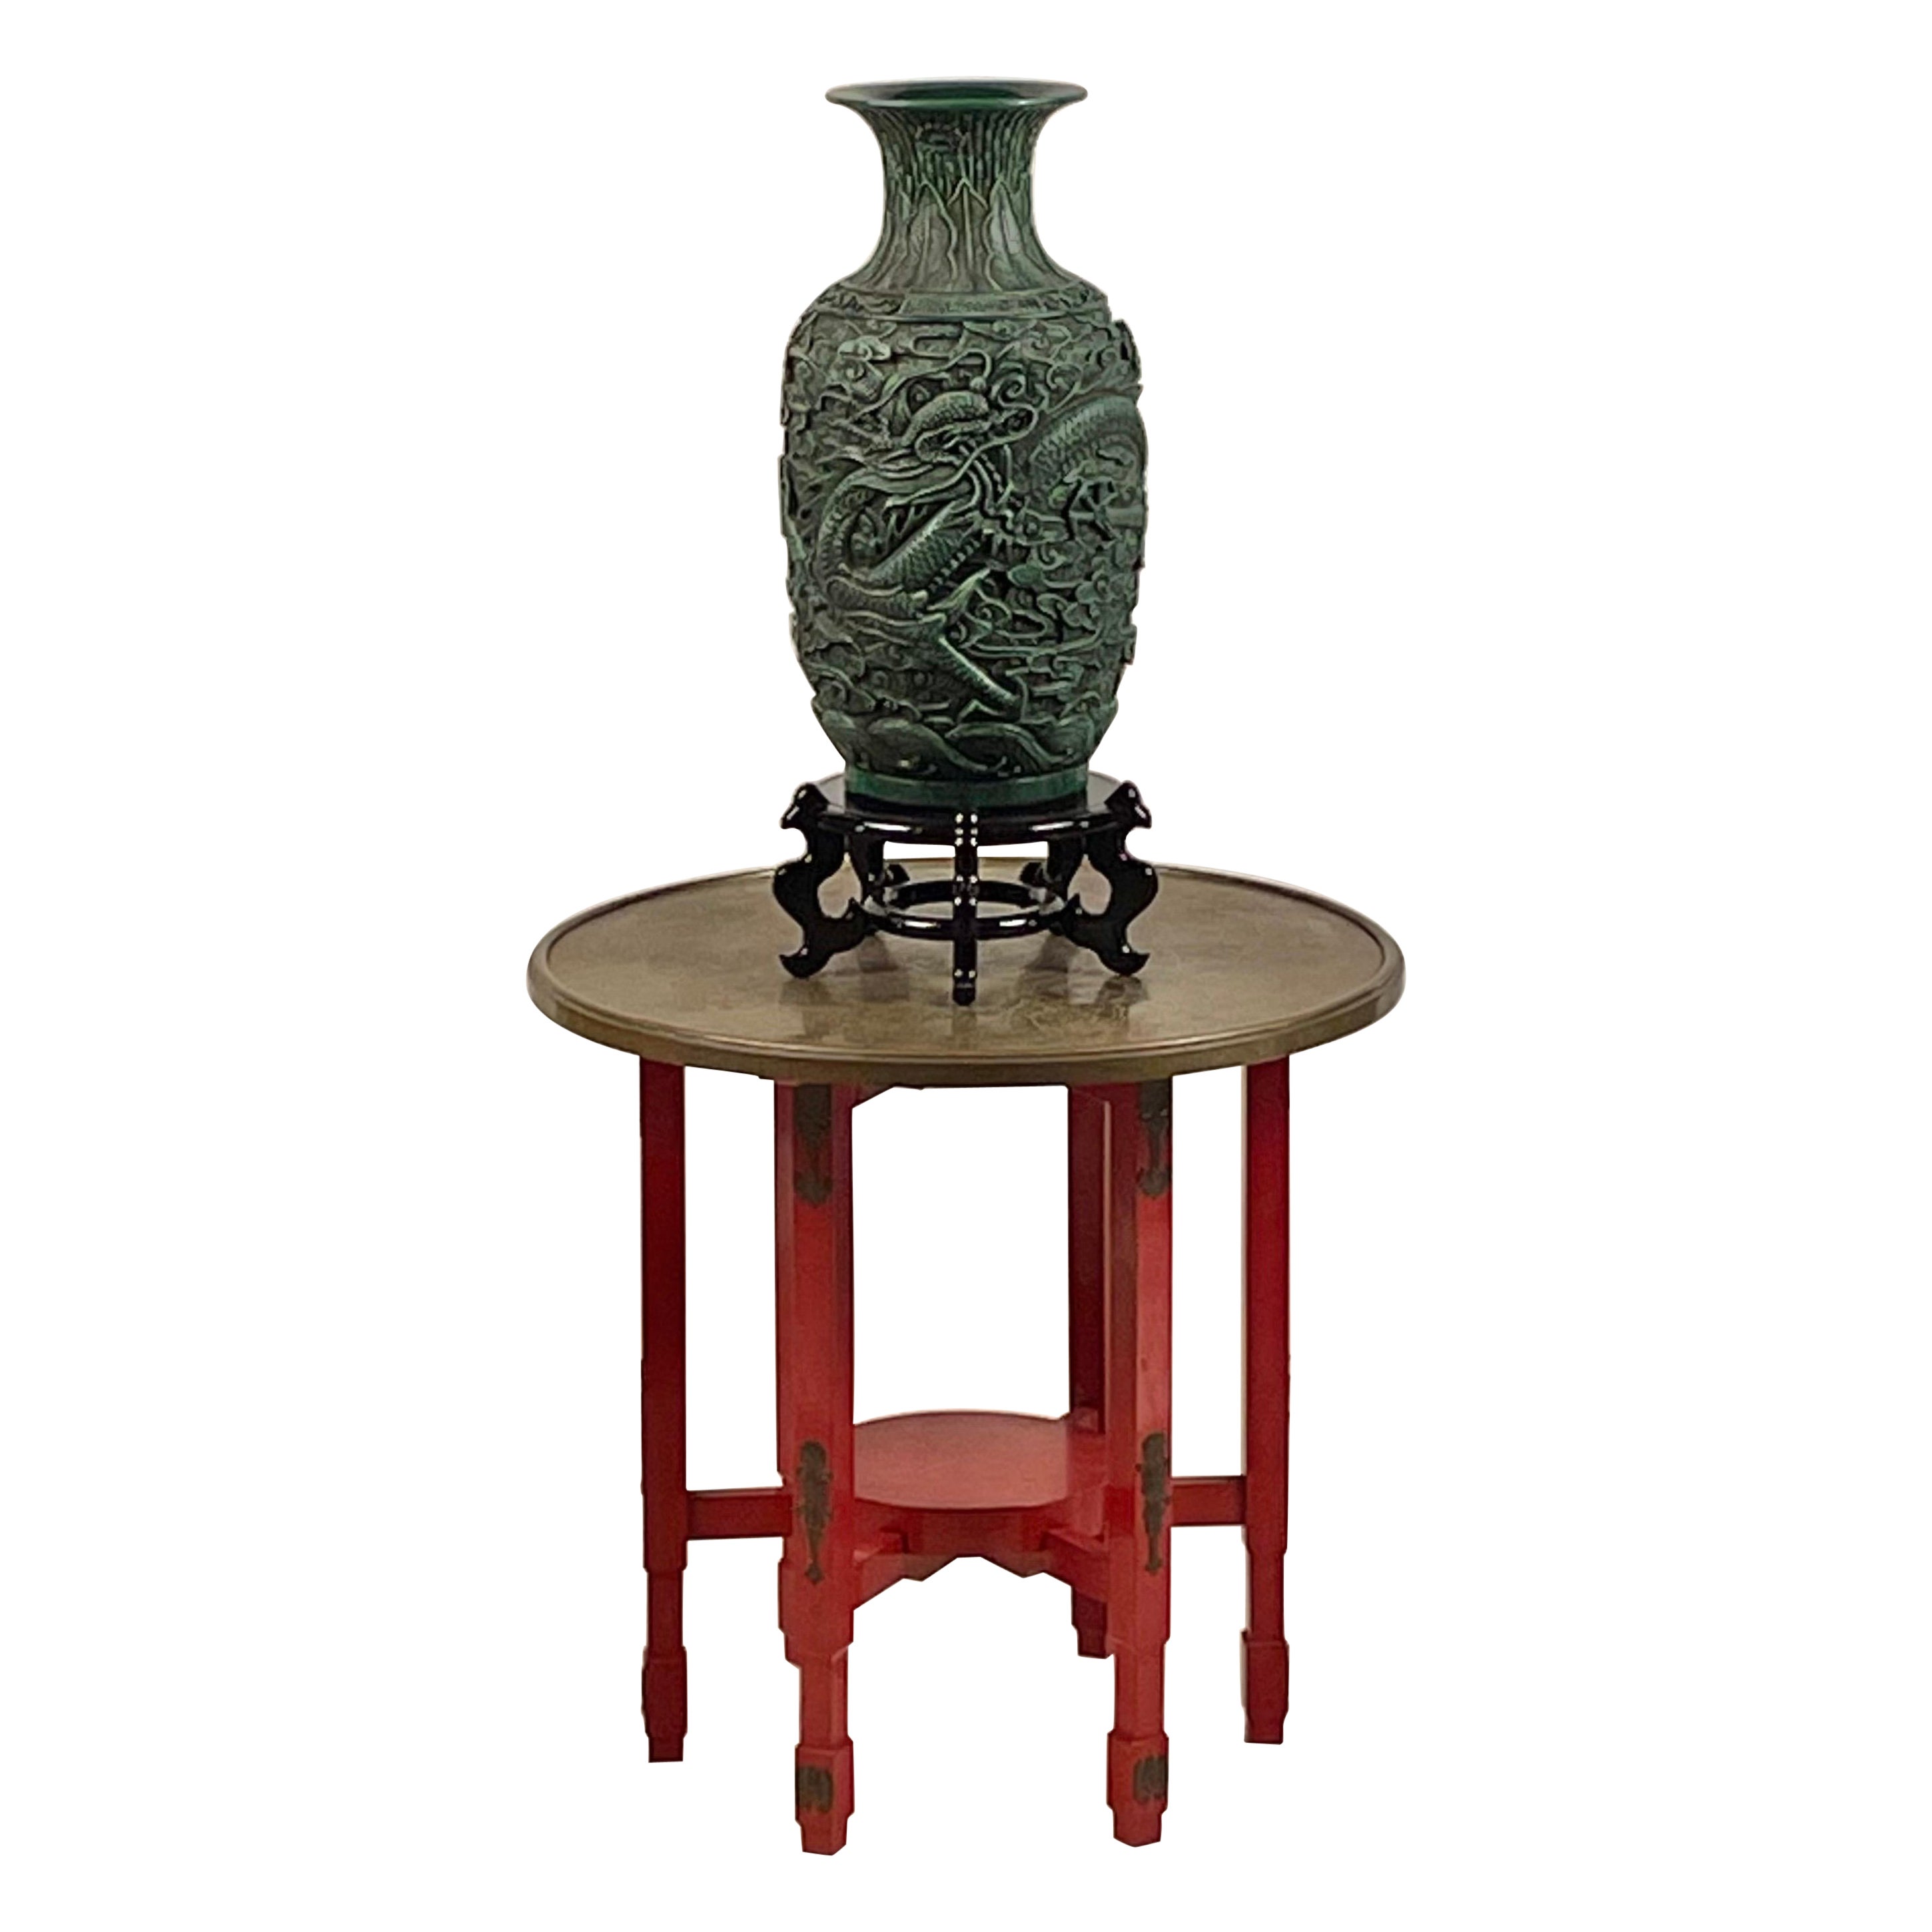 Chinese Lacquer and Bronze Table & Green Dragon Vase the Style of Tony Duquette